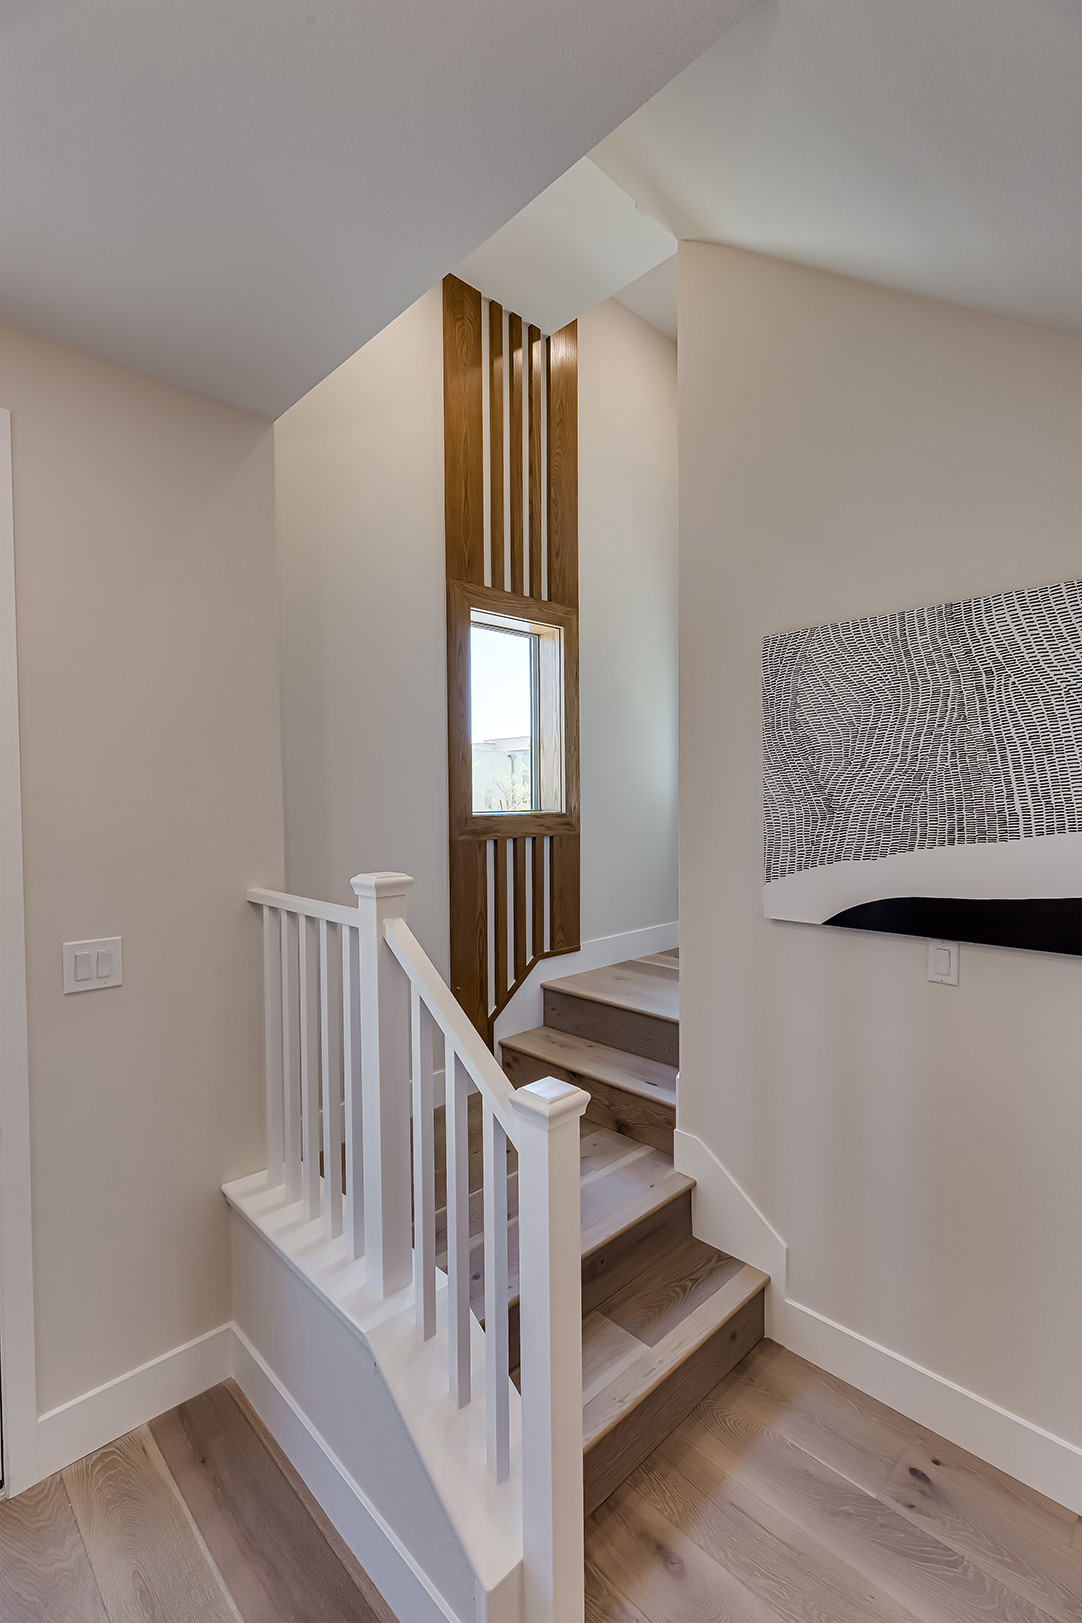 Mision style Railing with Stained Accent Wall